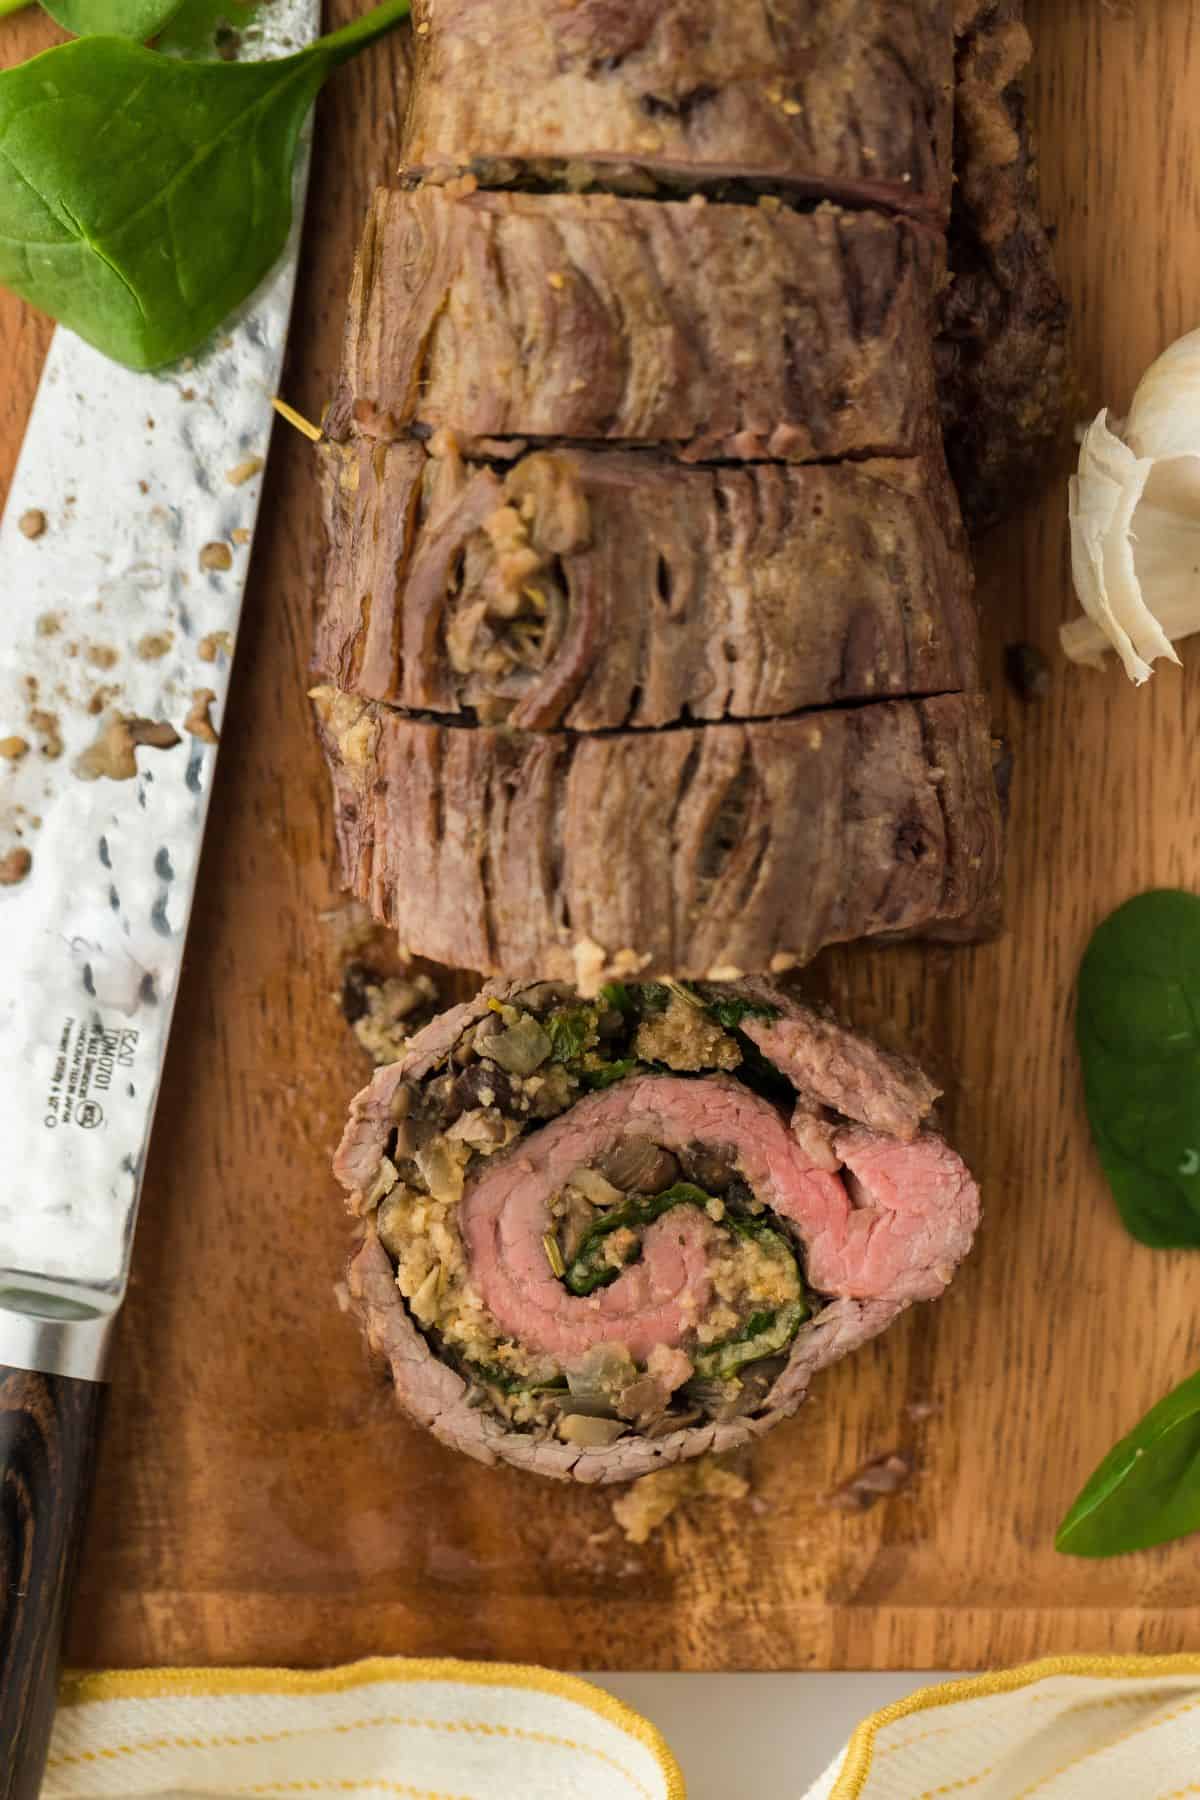 Overhead shot of a stuffed flank steak with mushroom and spinach filling, cut into slices on a wooden cutting board, with a knife and fresh spinach next to it